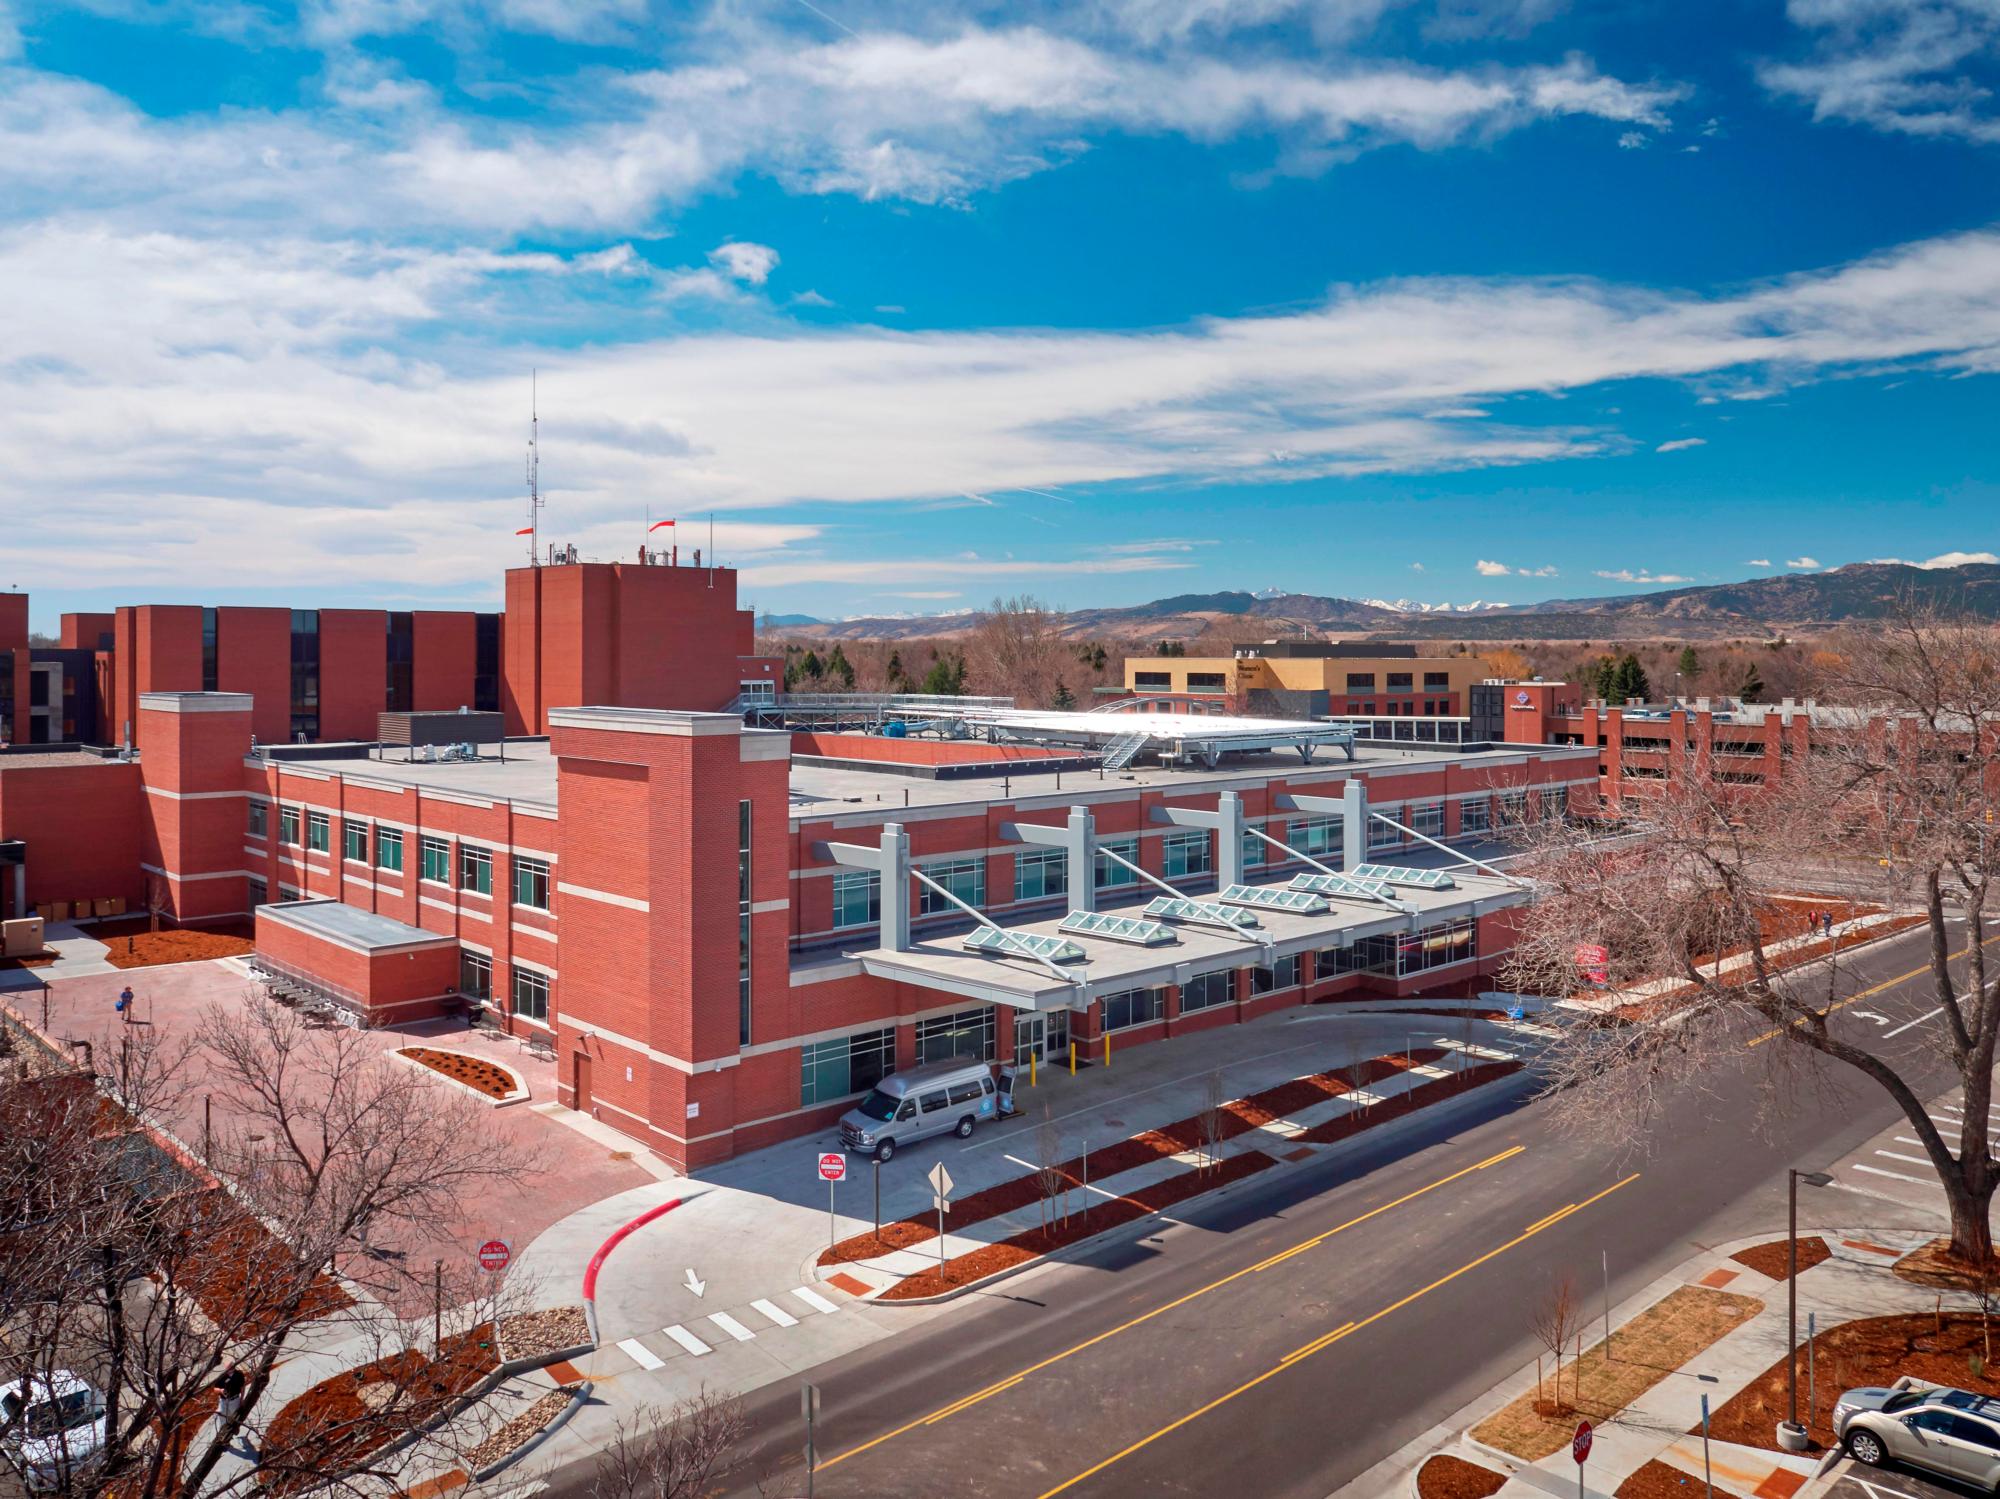 The exterior of the bricked Poudre Valley Hospital with a blue, white clouded sky above it